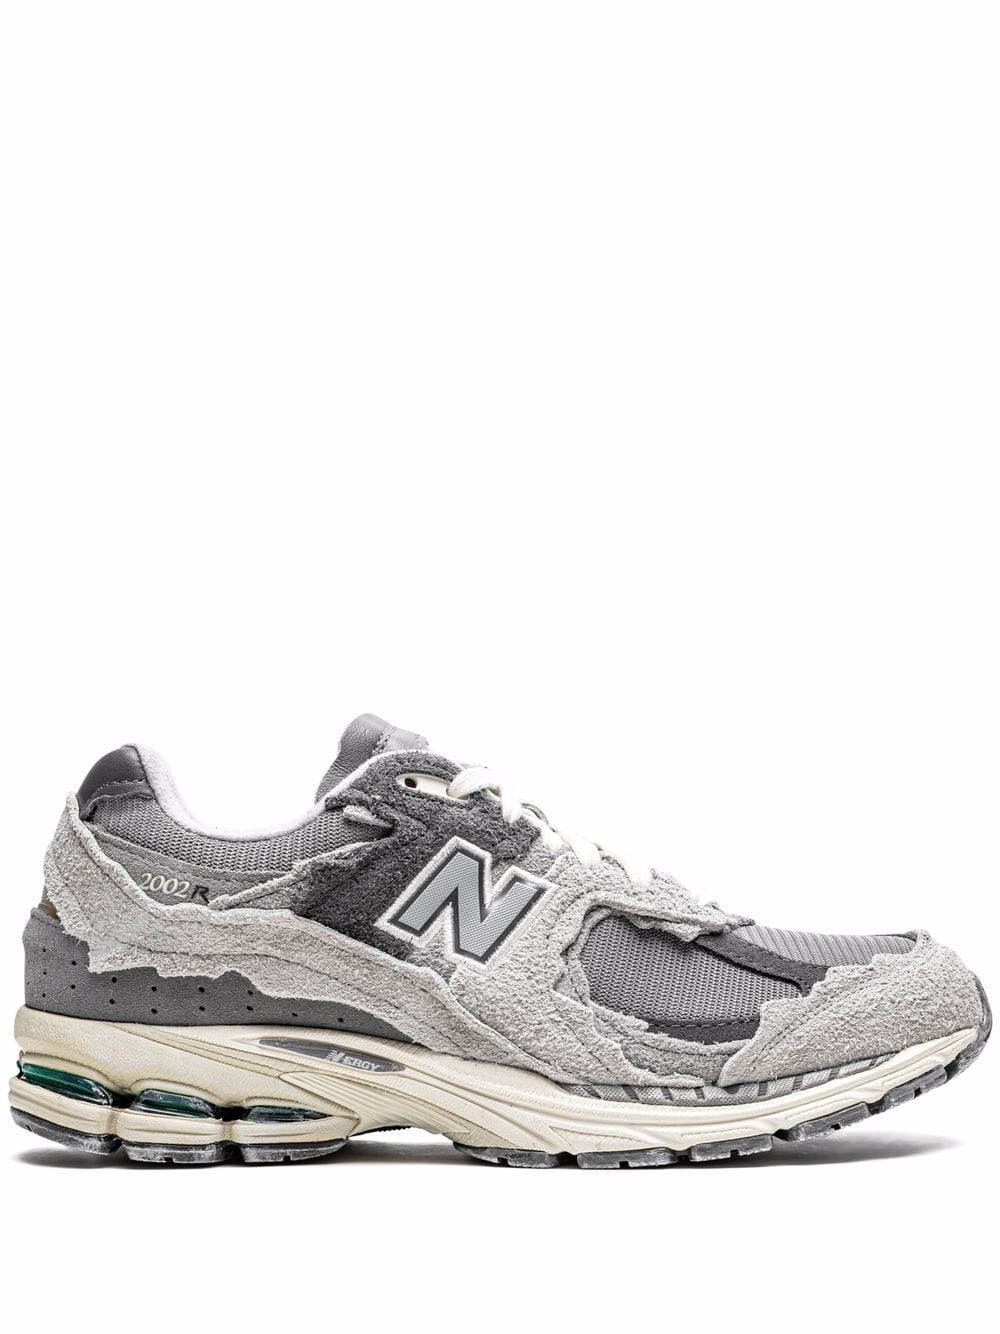 New Balance 2002R "Protection Pack - Grey" sneakers von New Balance